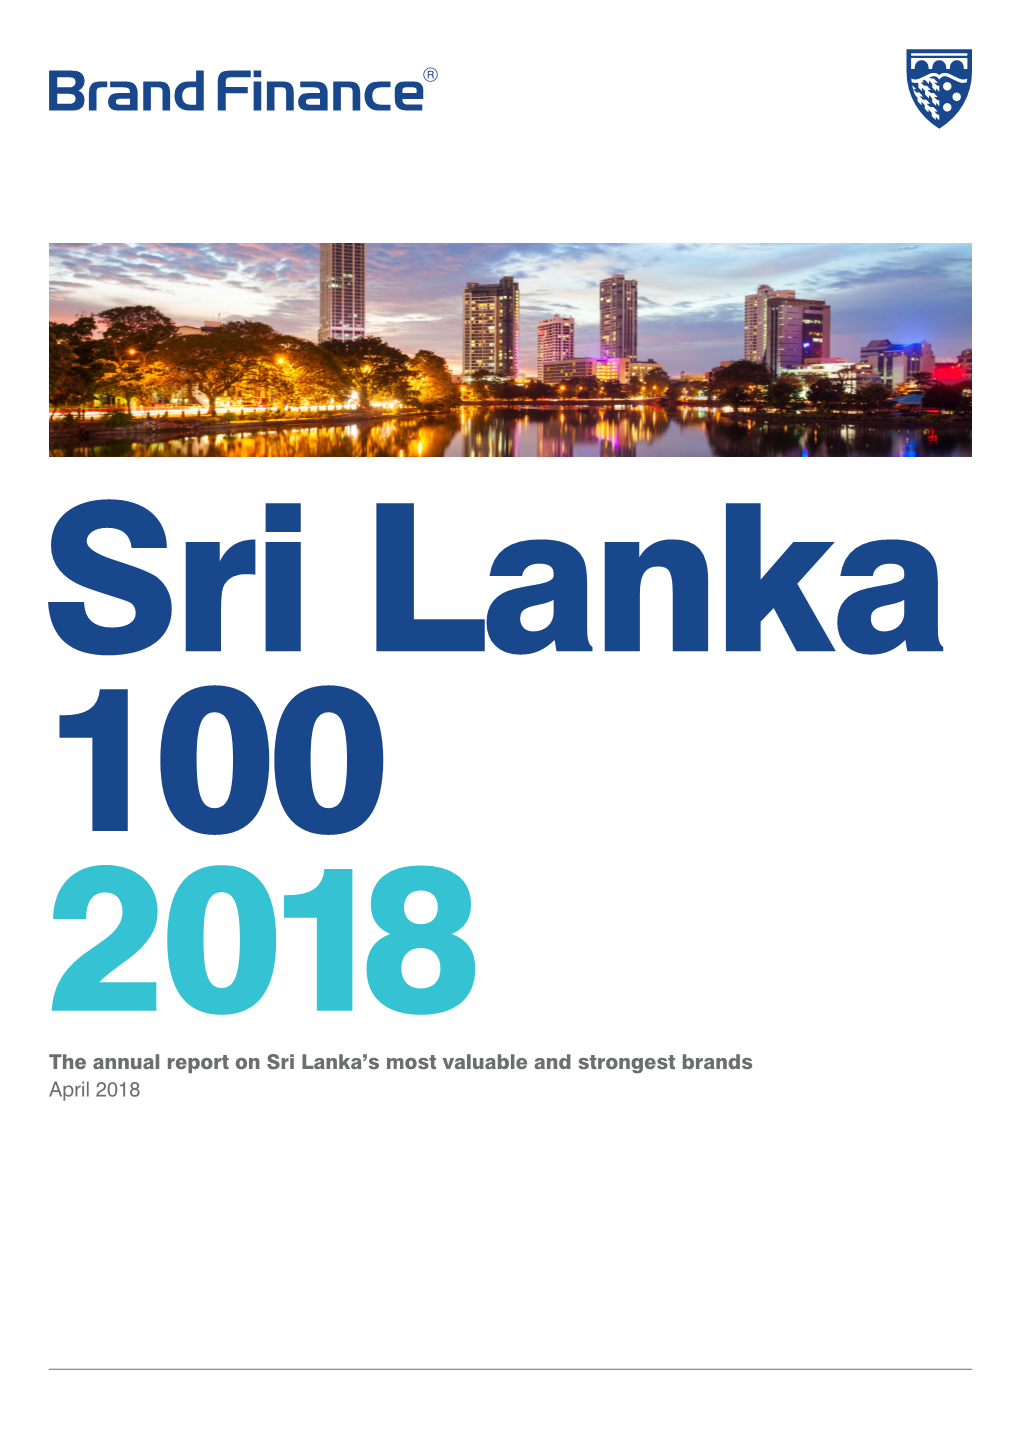 The Annual Report on Sri Lanka's Most Valuable and Strongest Brands April